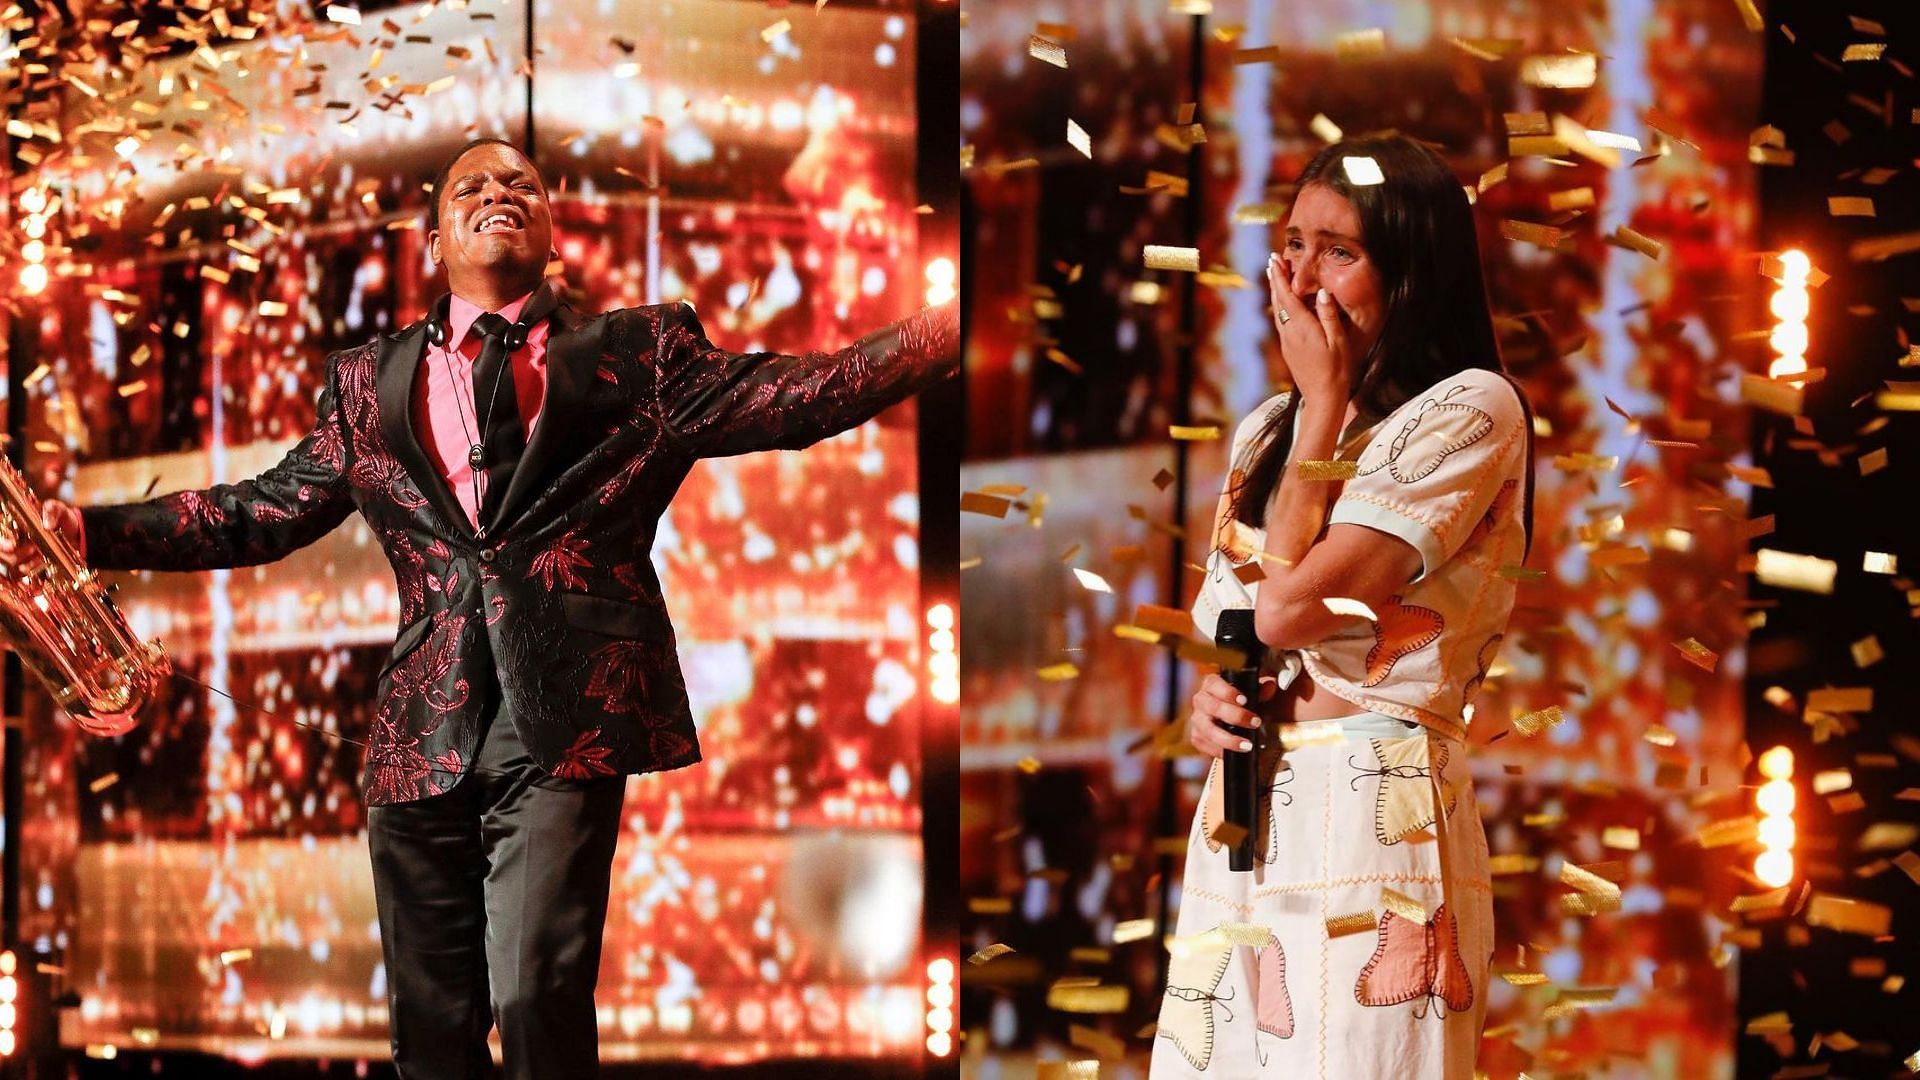 Avery Dixon and Lily Meola received Golden Buzzer in America&#039;s Got Talent Season 17 (Image via agt/Instagram)